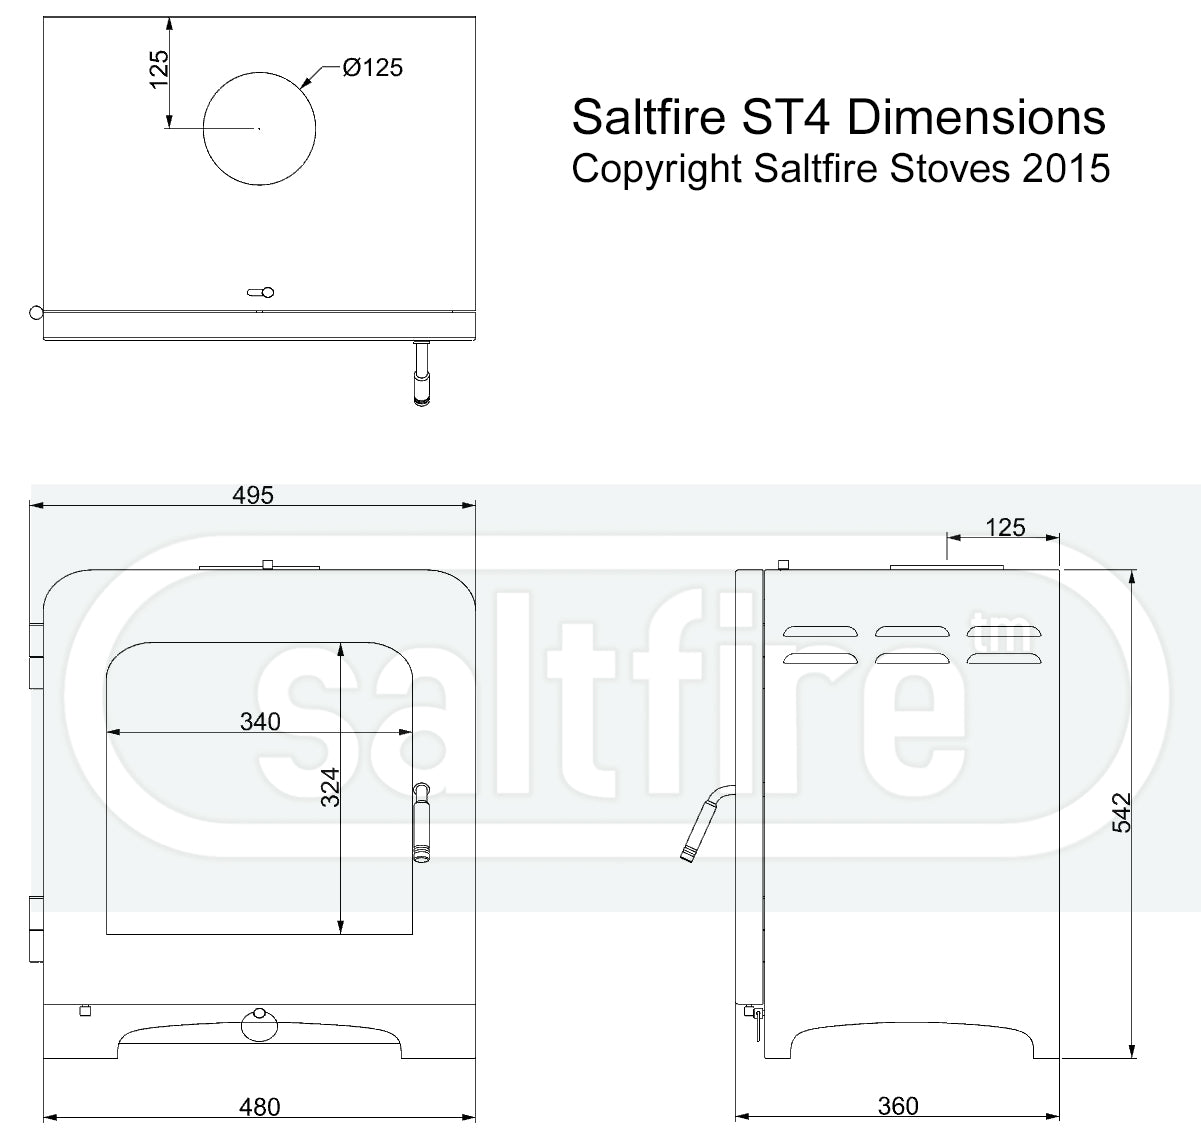 Dimensions and specifications for the ST4 multifuel stove